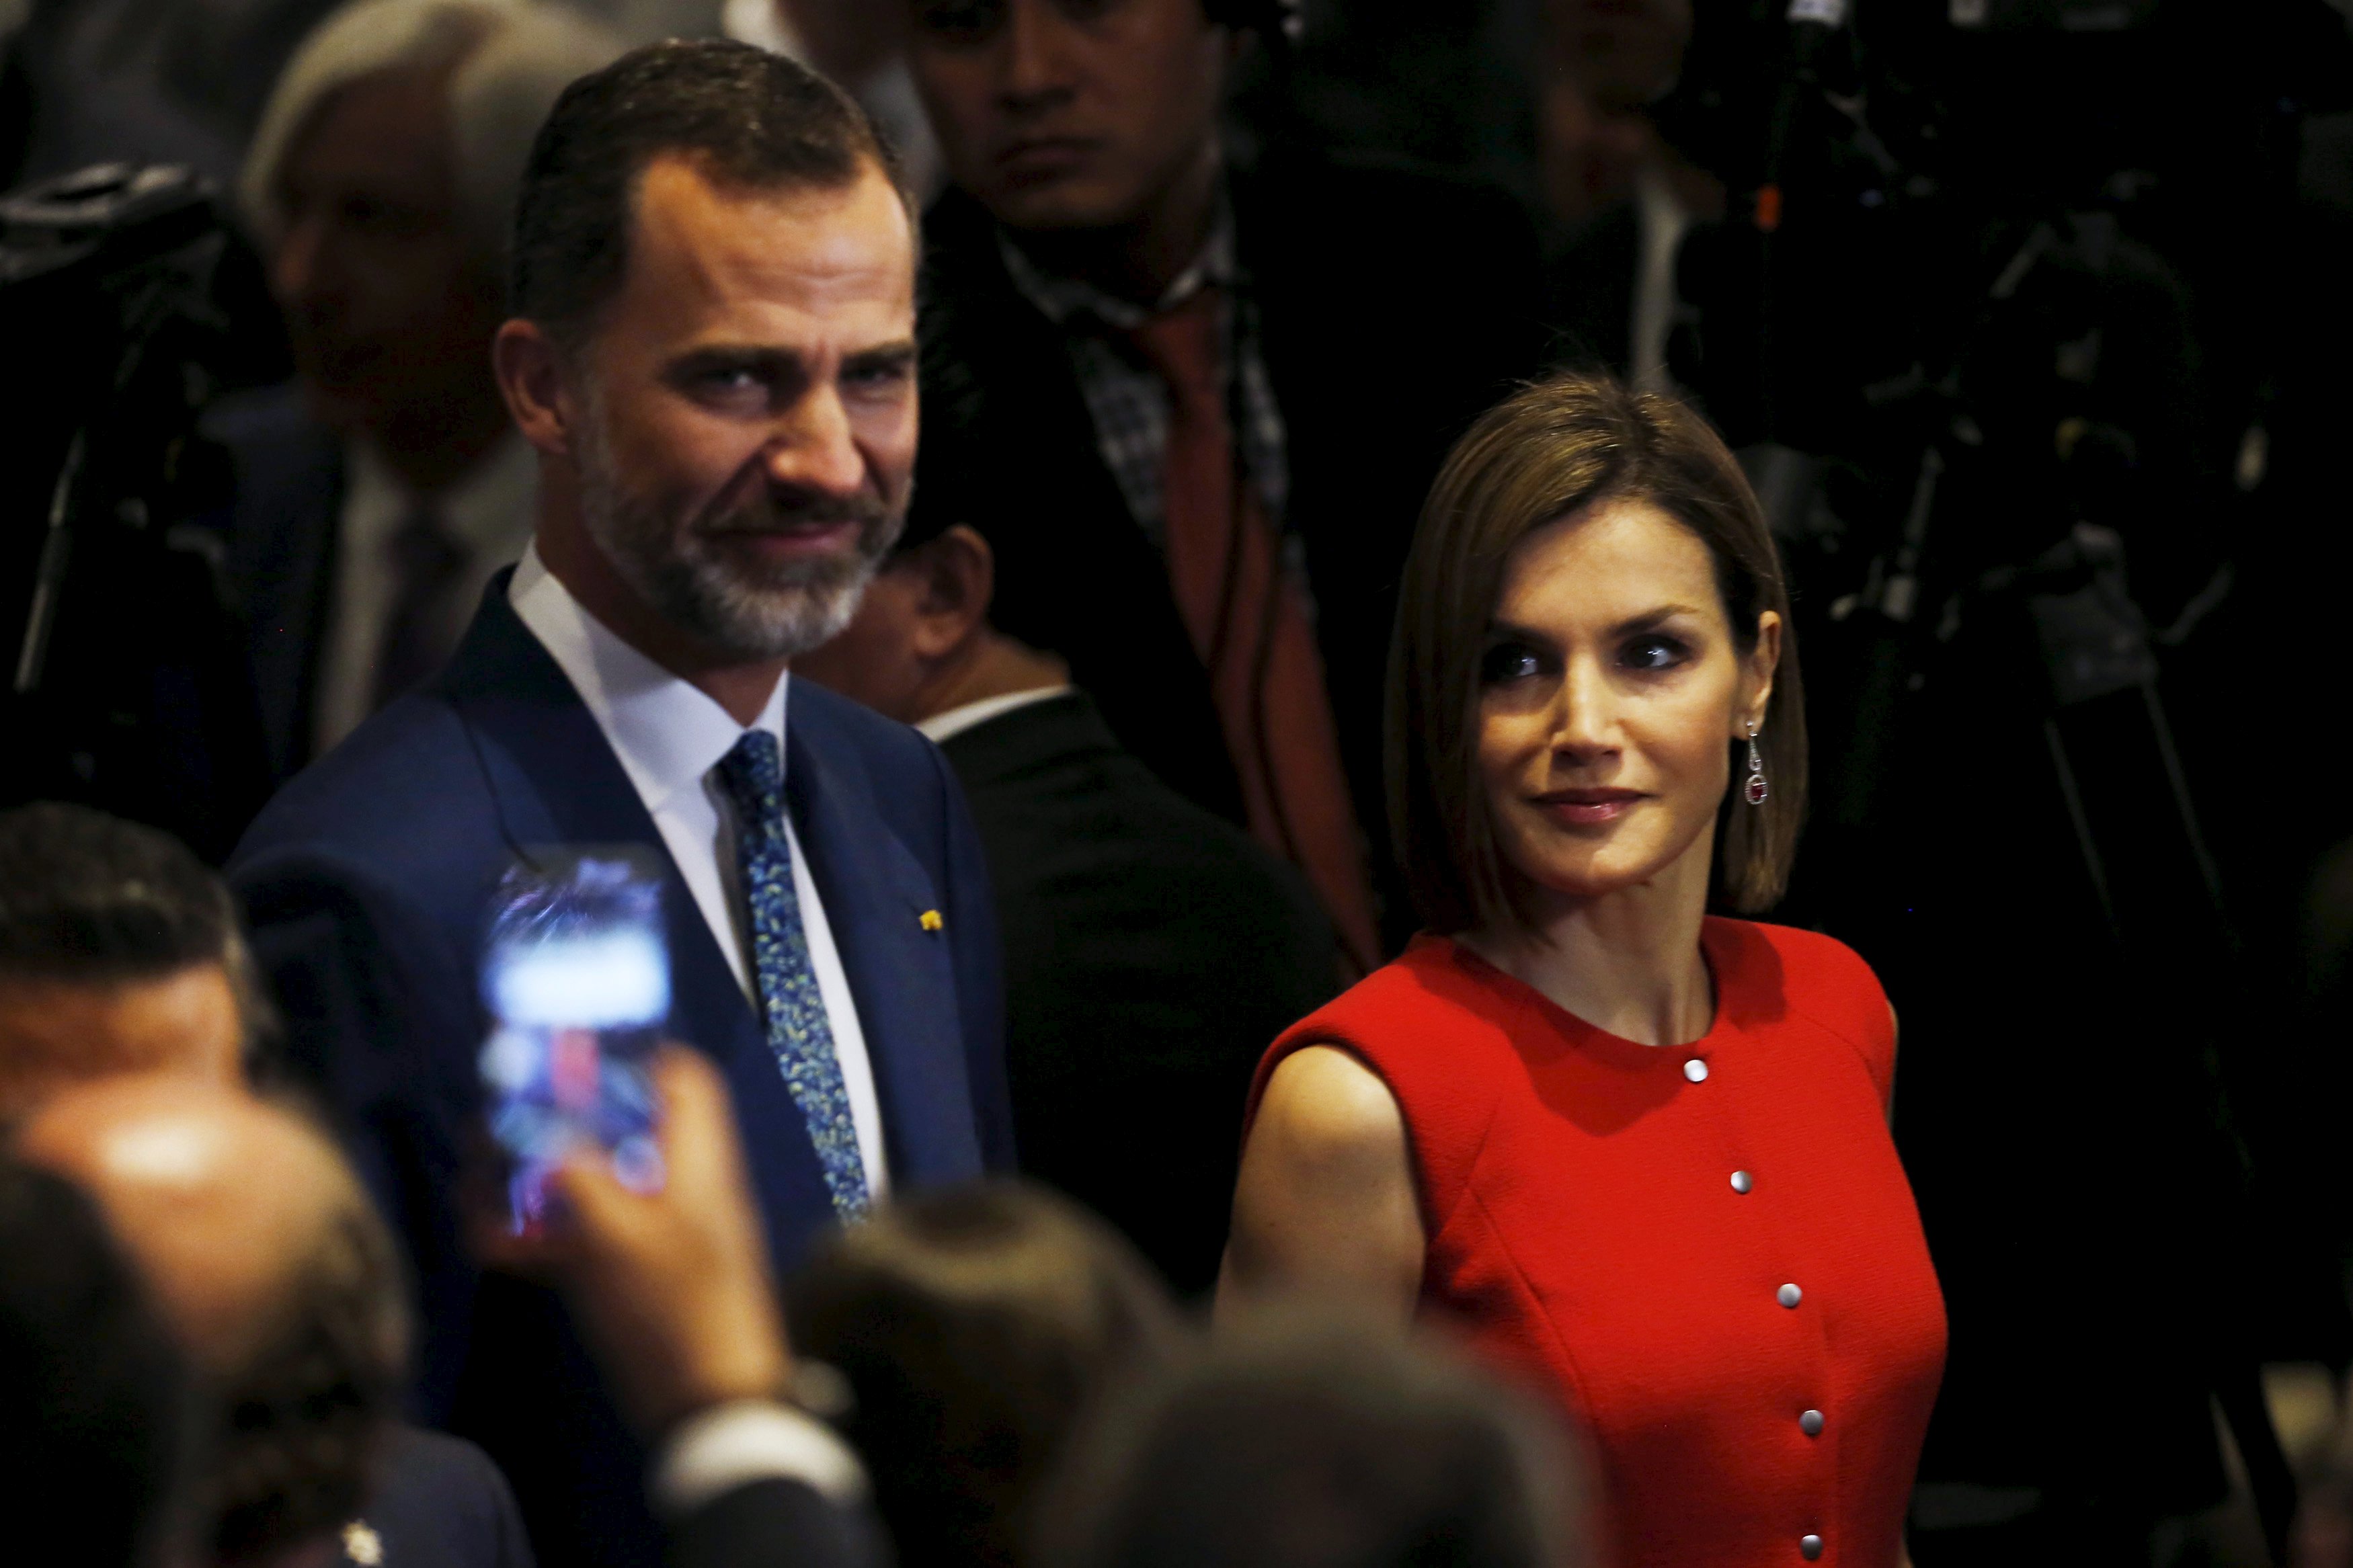 Spain's King Felipe and Queen Letizia arrive at the "Business Meeting Espana-Mexico" in Mexico City